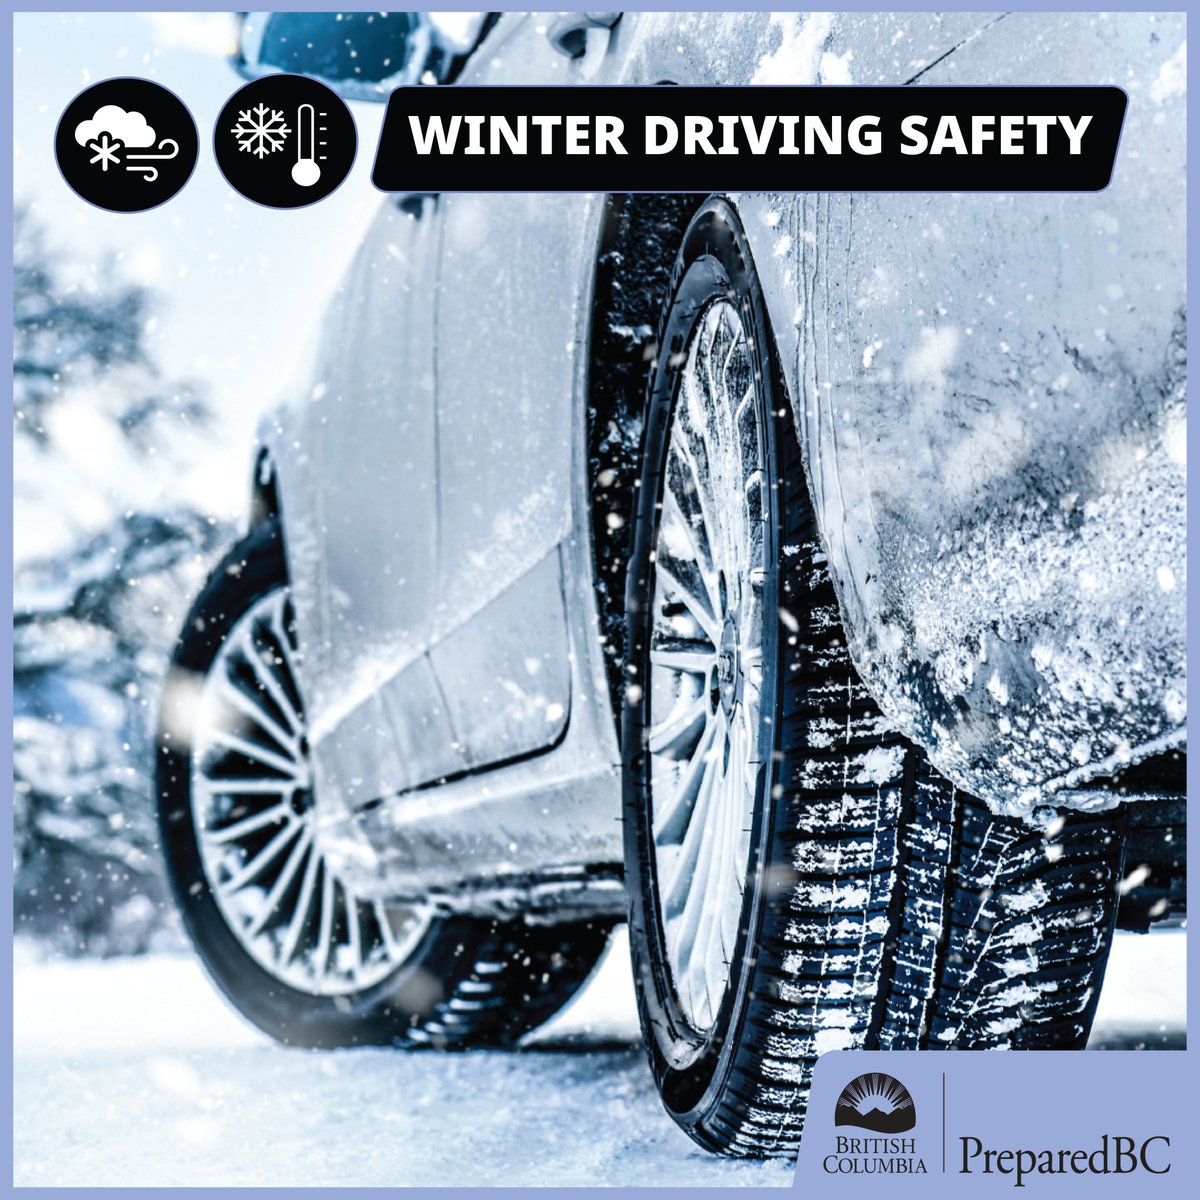 A mix of rain & snow is forecast for parts of BC until Wednesday morning which may impact road conditions Ensure you have winter tires and a vehicle emergency kit ✔️ Follow @DriveBC & @TranBC for travel advisories & @ECCCWeatherBC for weather alerts✔️ PreparedBC.ca/WinterWeather